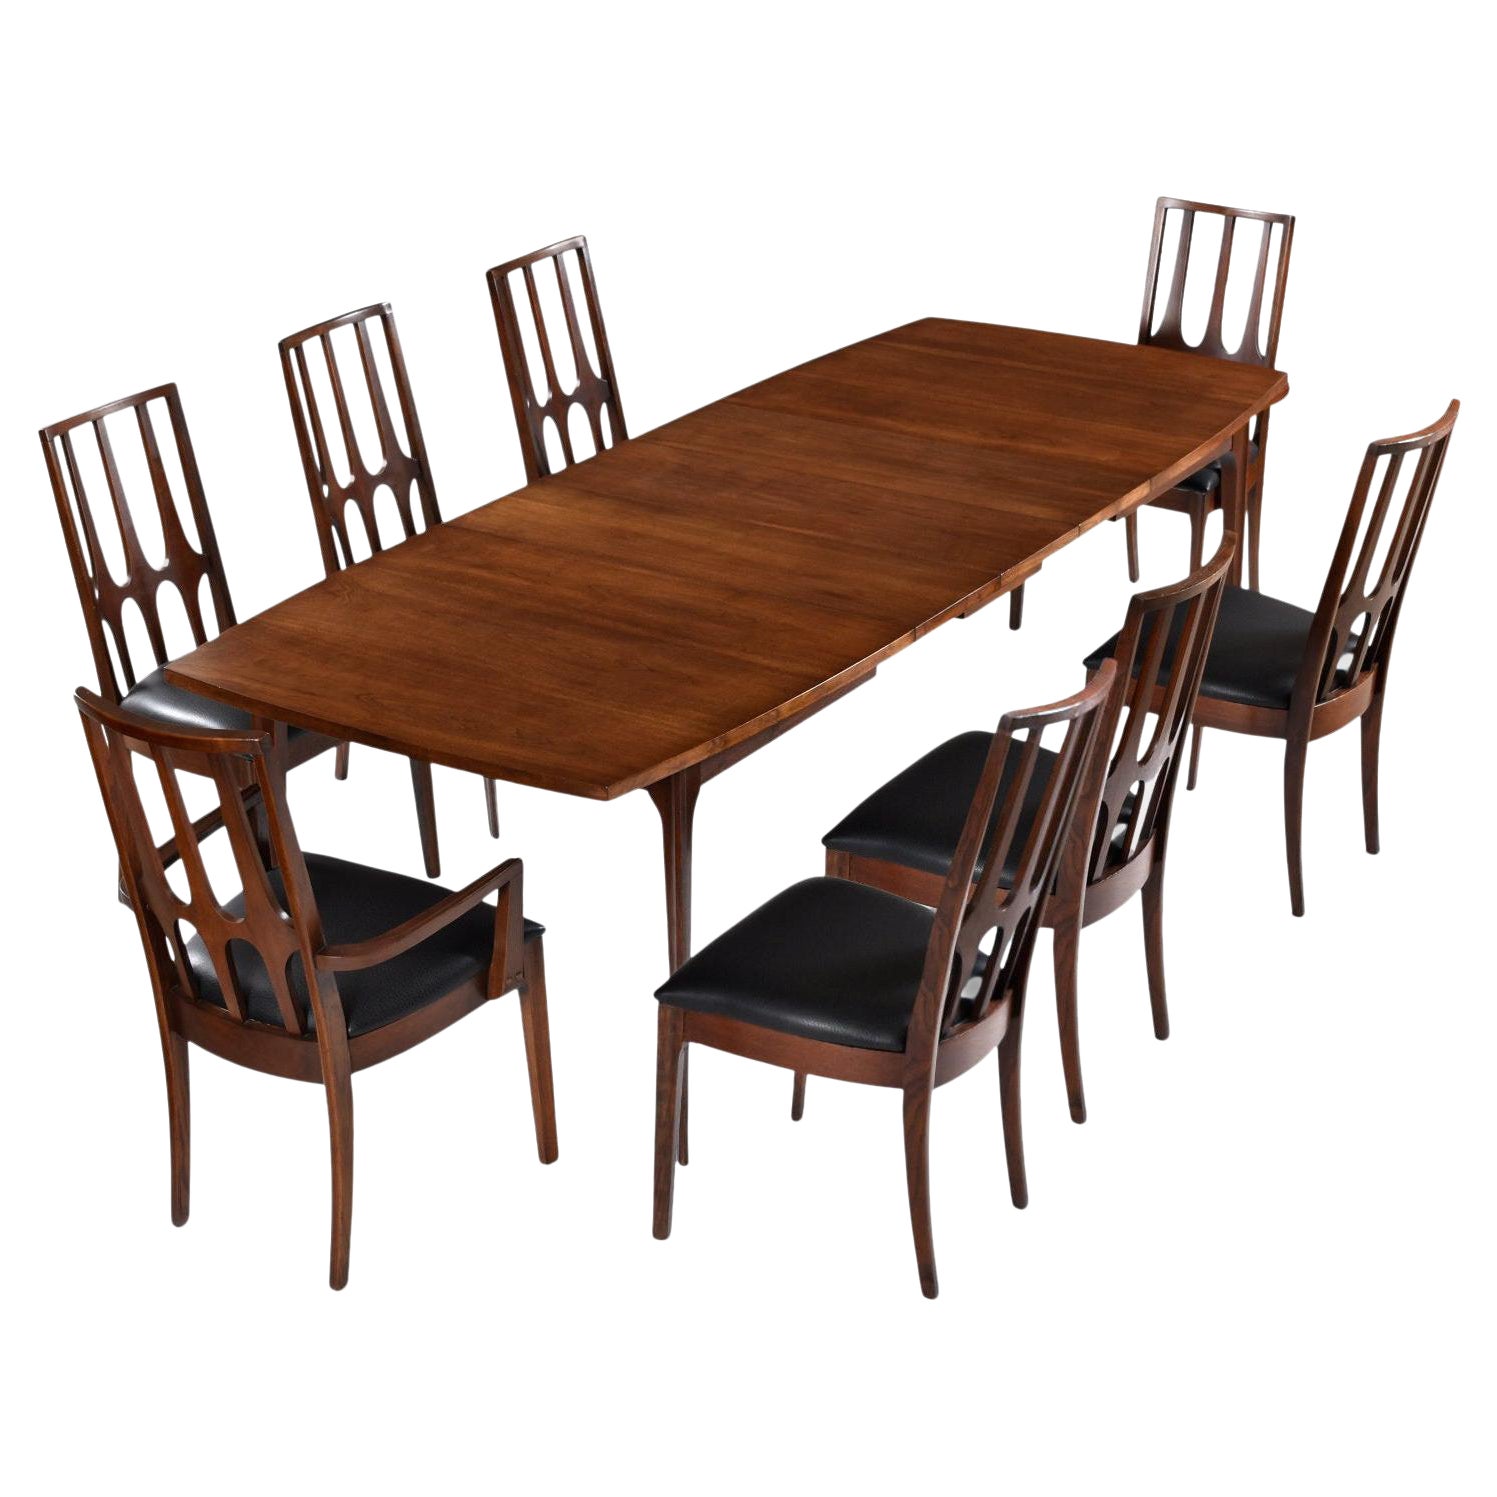 Restored Broyhill Brasilia Dining Set with Expanding Table and 8 Chairs